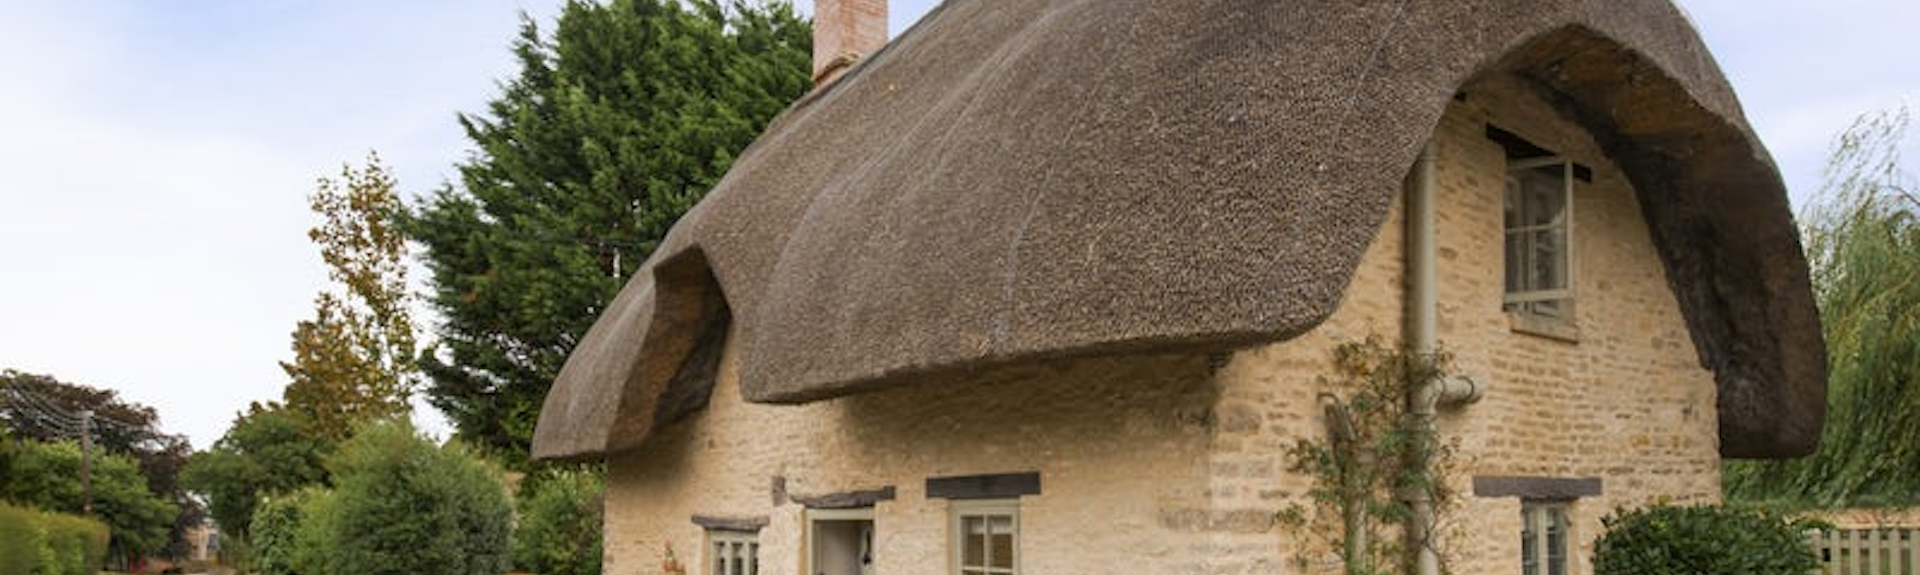 A thatched country cottage overlooks a quiet country lane in the Cotswolds.